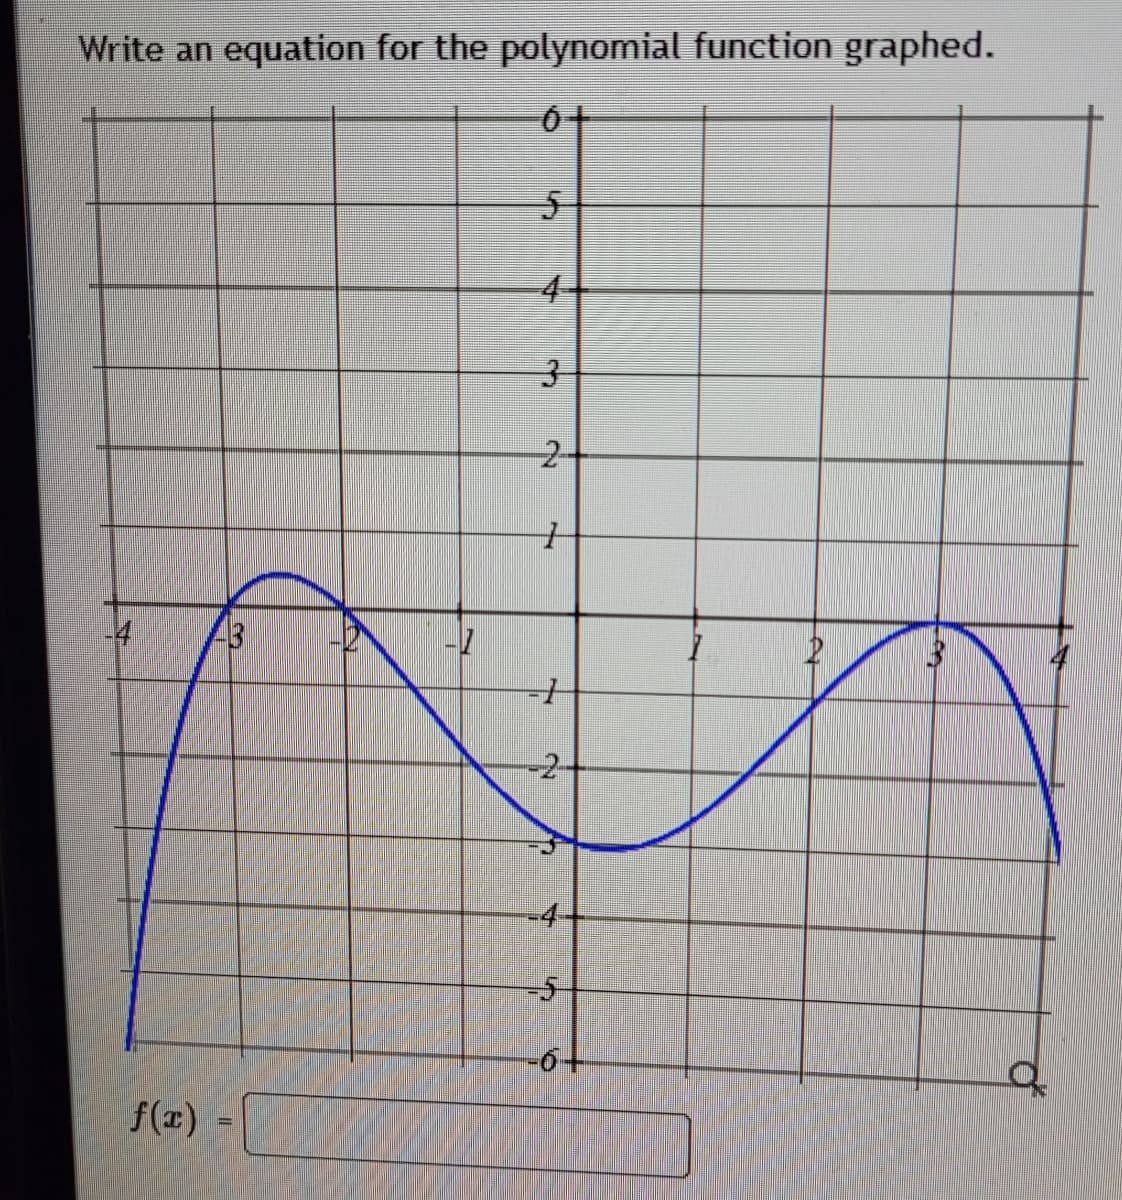 Write an equation for the polynomial function graphed.
0+
4
2-
43
-2-
-4-
-5
f(x)
3.
